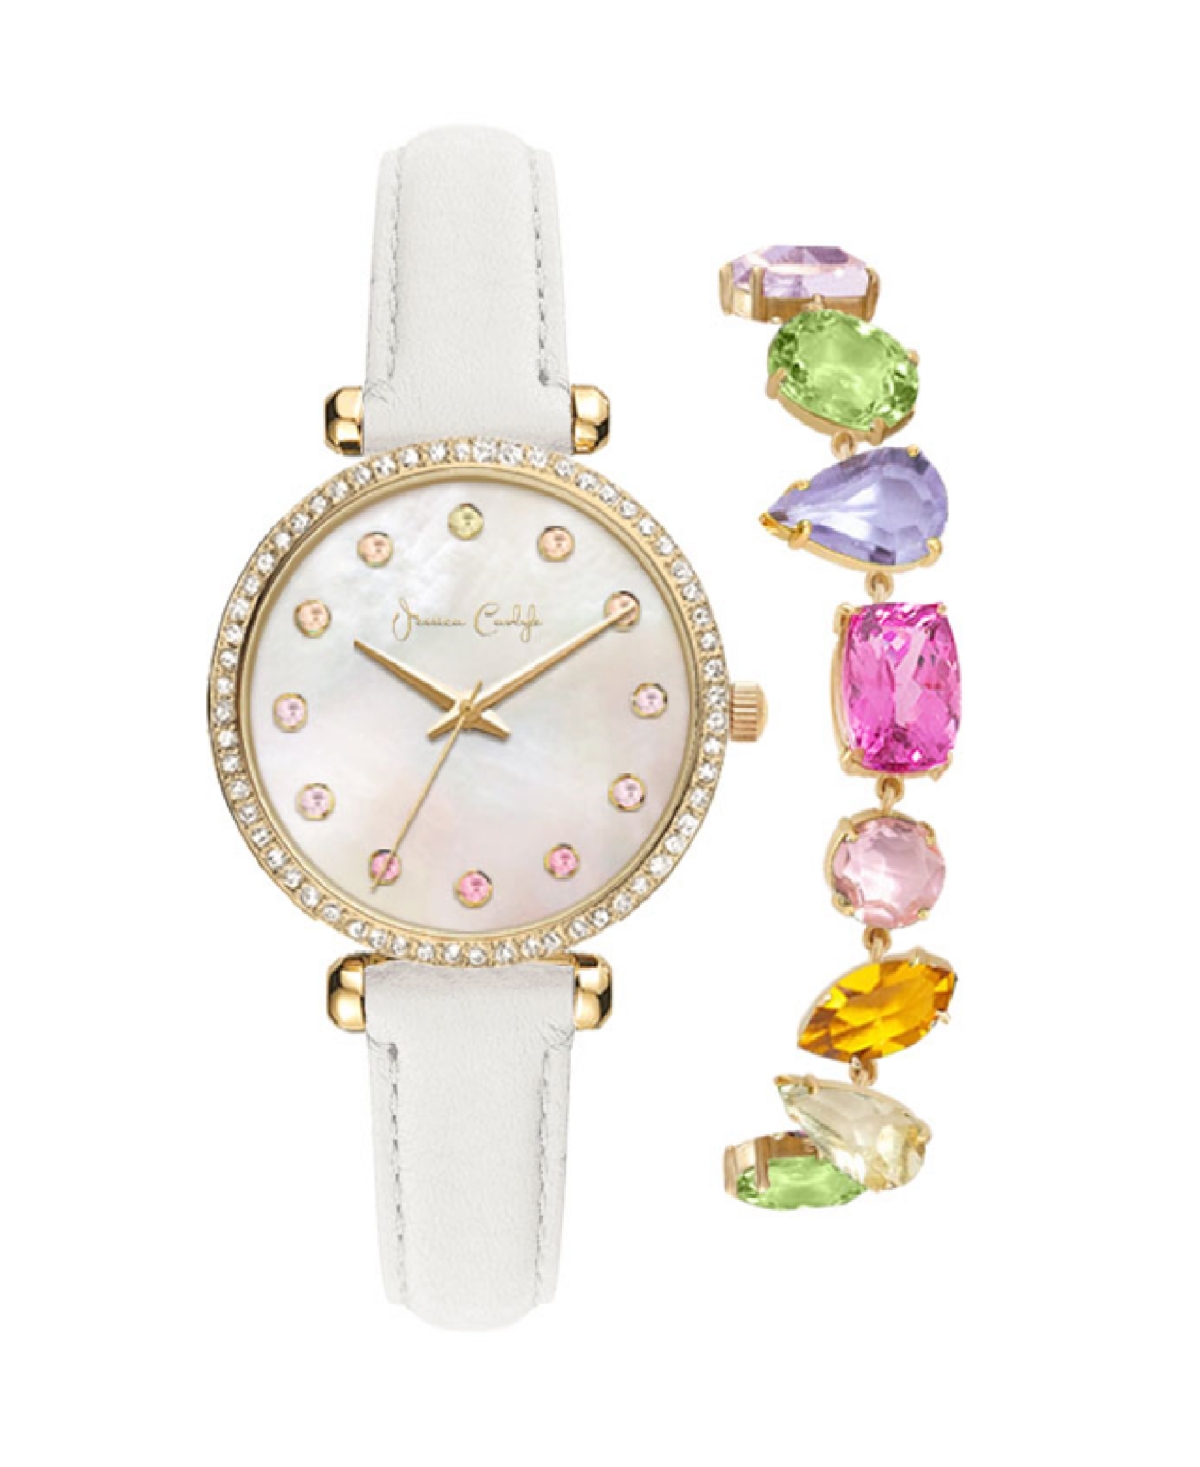 Jessica Carlyle Women's Quartz White Polyurethane Leather Watch 33mm Gift Set In White,white Mother Of Pearl